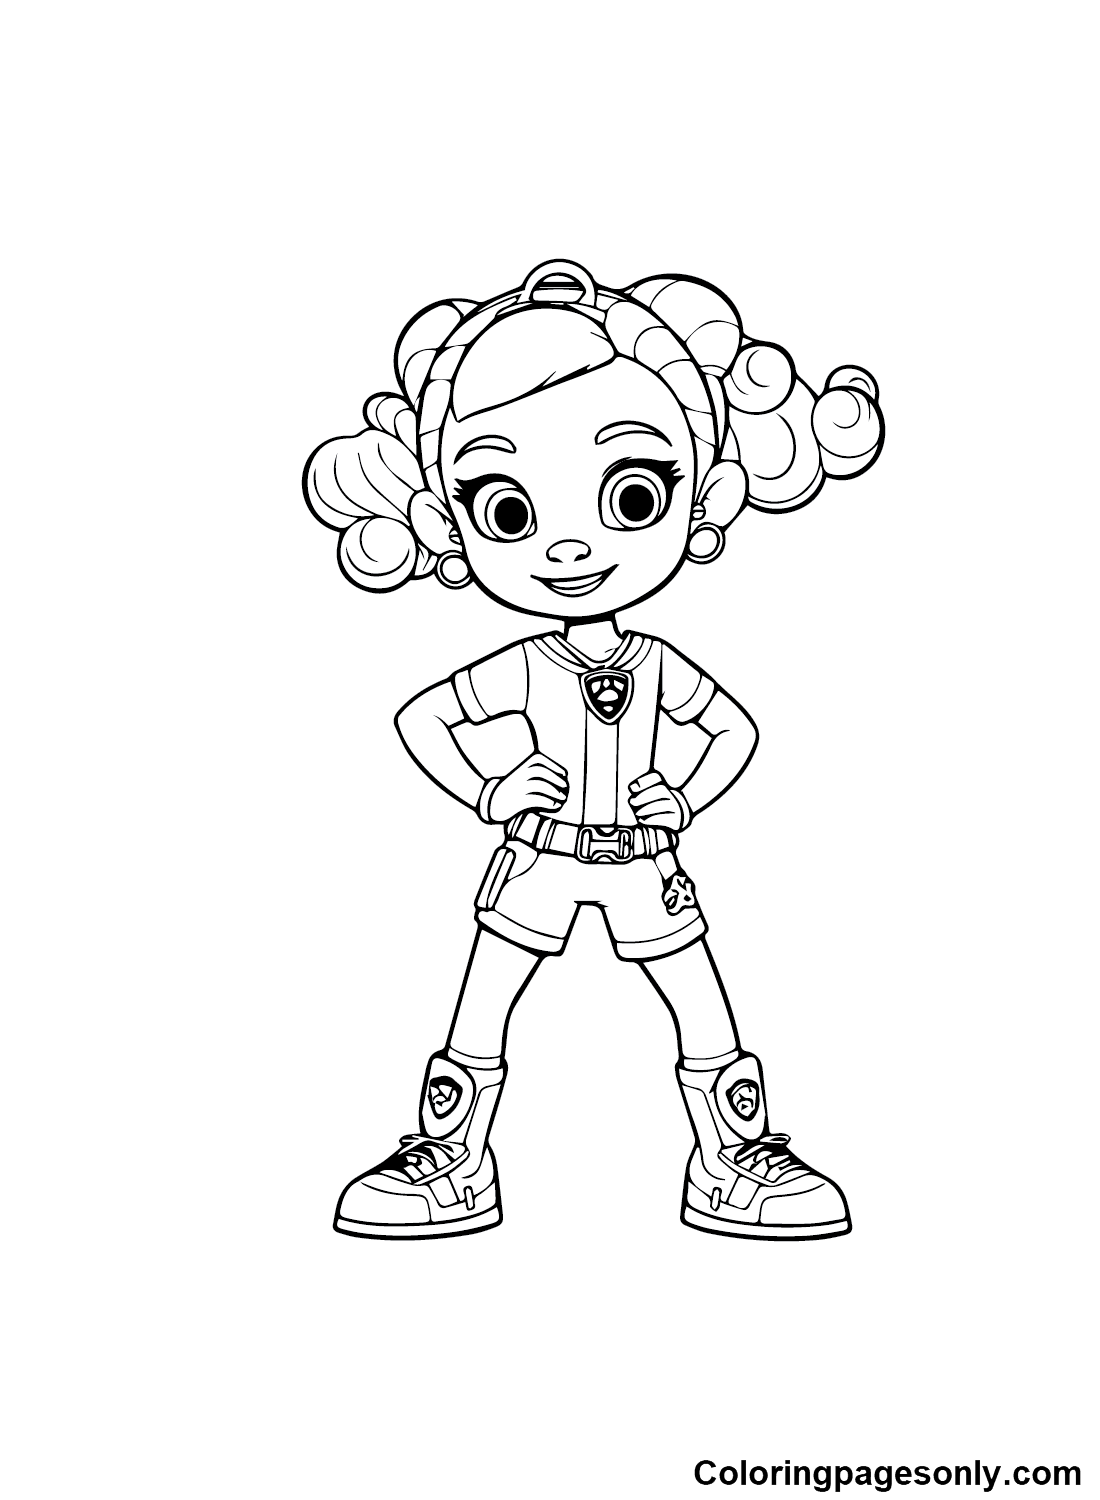 Adorable Rainbow Rangers Coloring Page